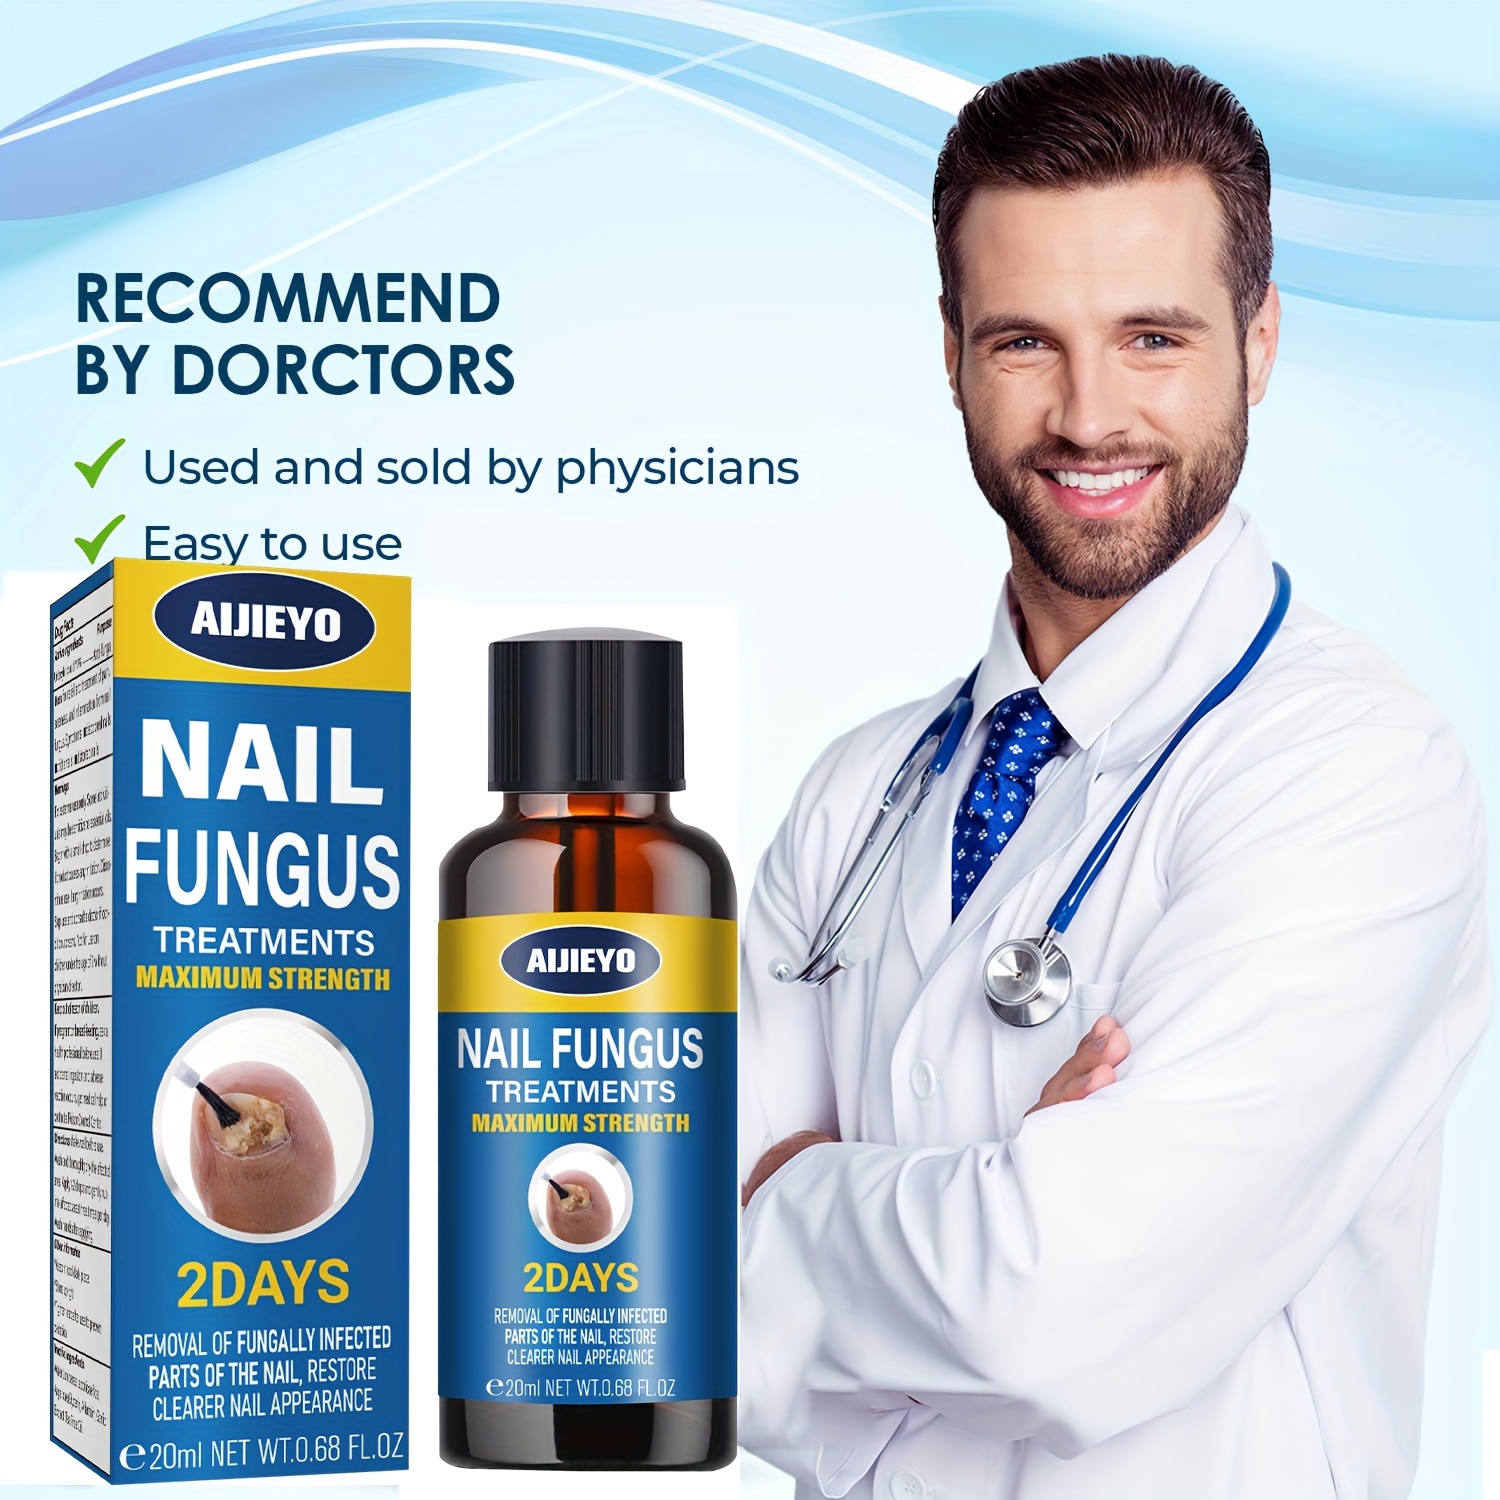 Best Toenail Fungus Supplements That Work - Top Product Brands Reviewed